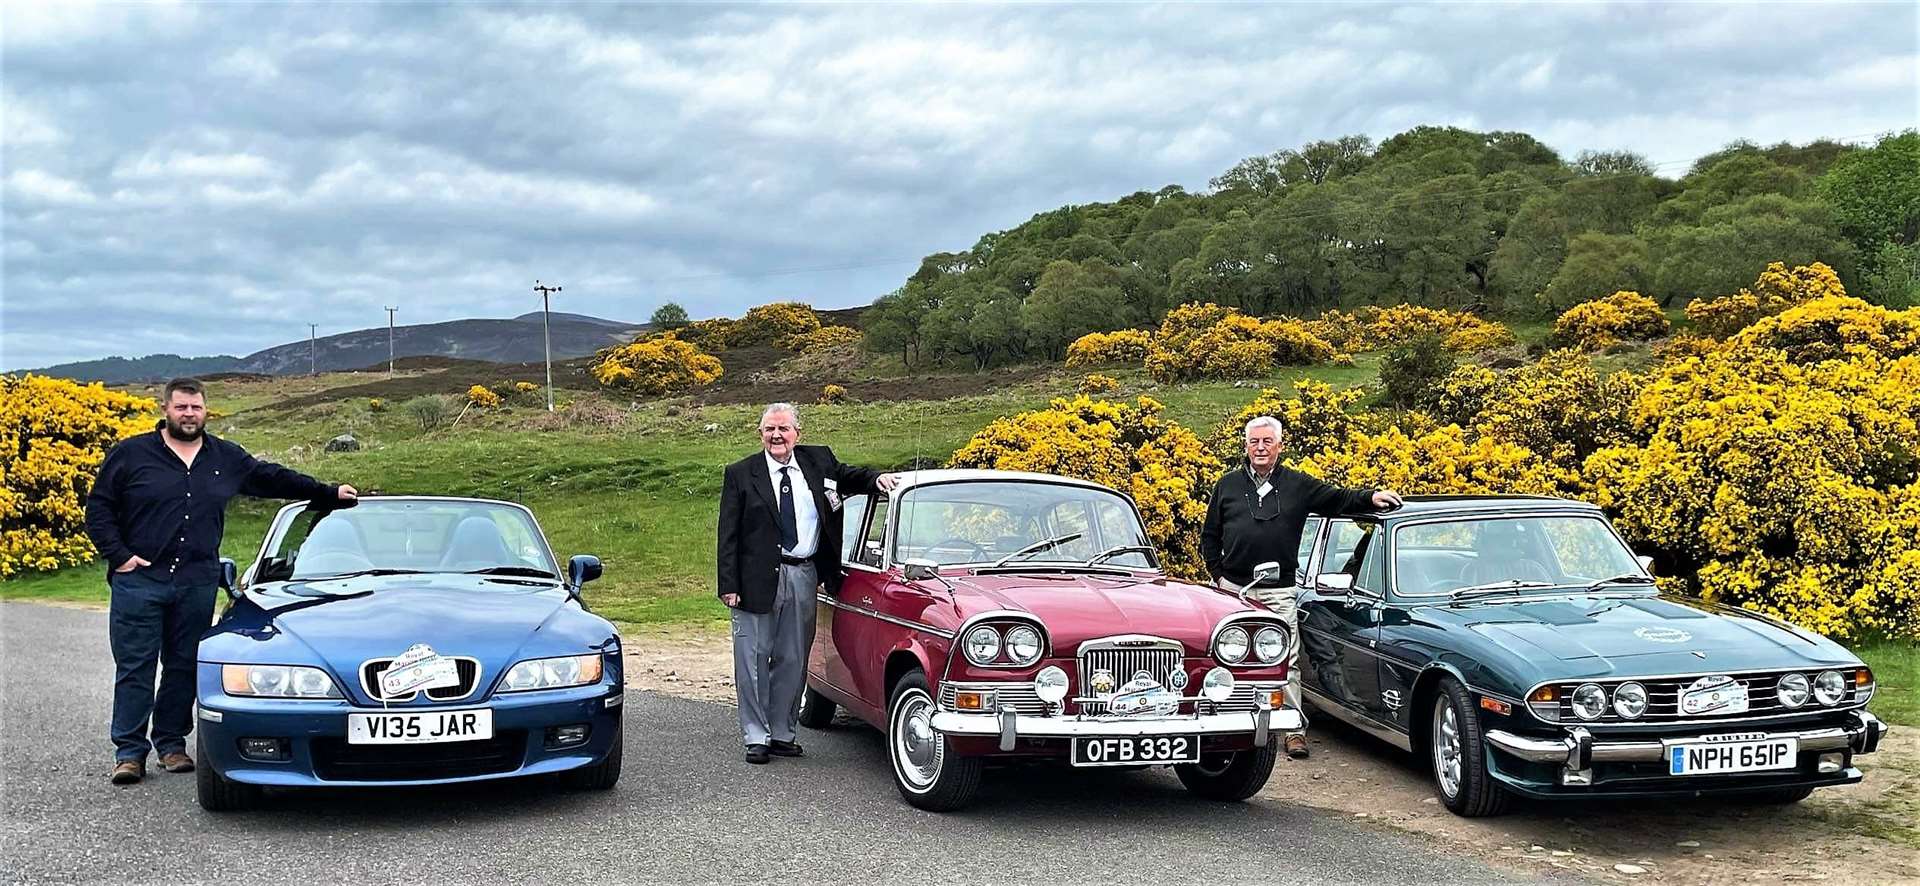 This was the first leg of the route between Royal Dornoch and Helmsdale during the Rotary Club of East Sutherland Coast to Coast Classic Car Tour. From left, James Green beside his 1999 BMW Z3, Bert Macleod with a 1963 Humber Sceptre and Les Bremner next to his 1976 Monarch Triumph Stag.